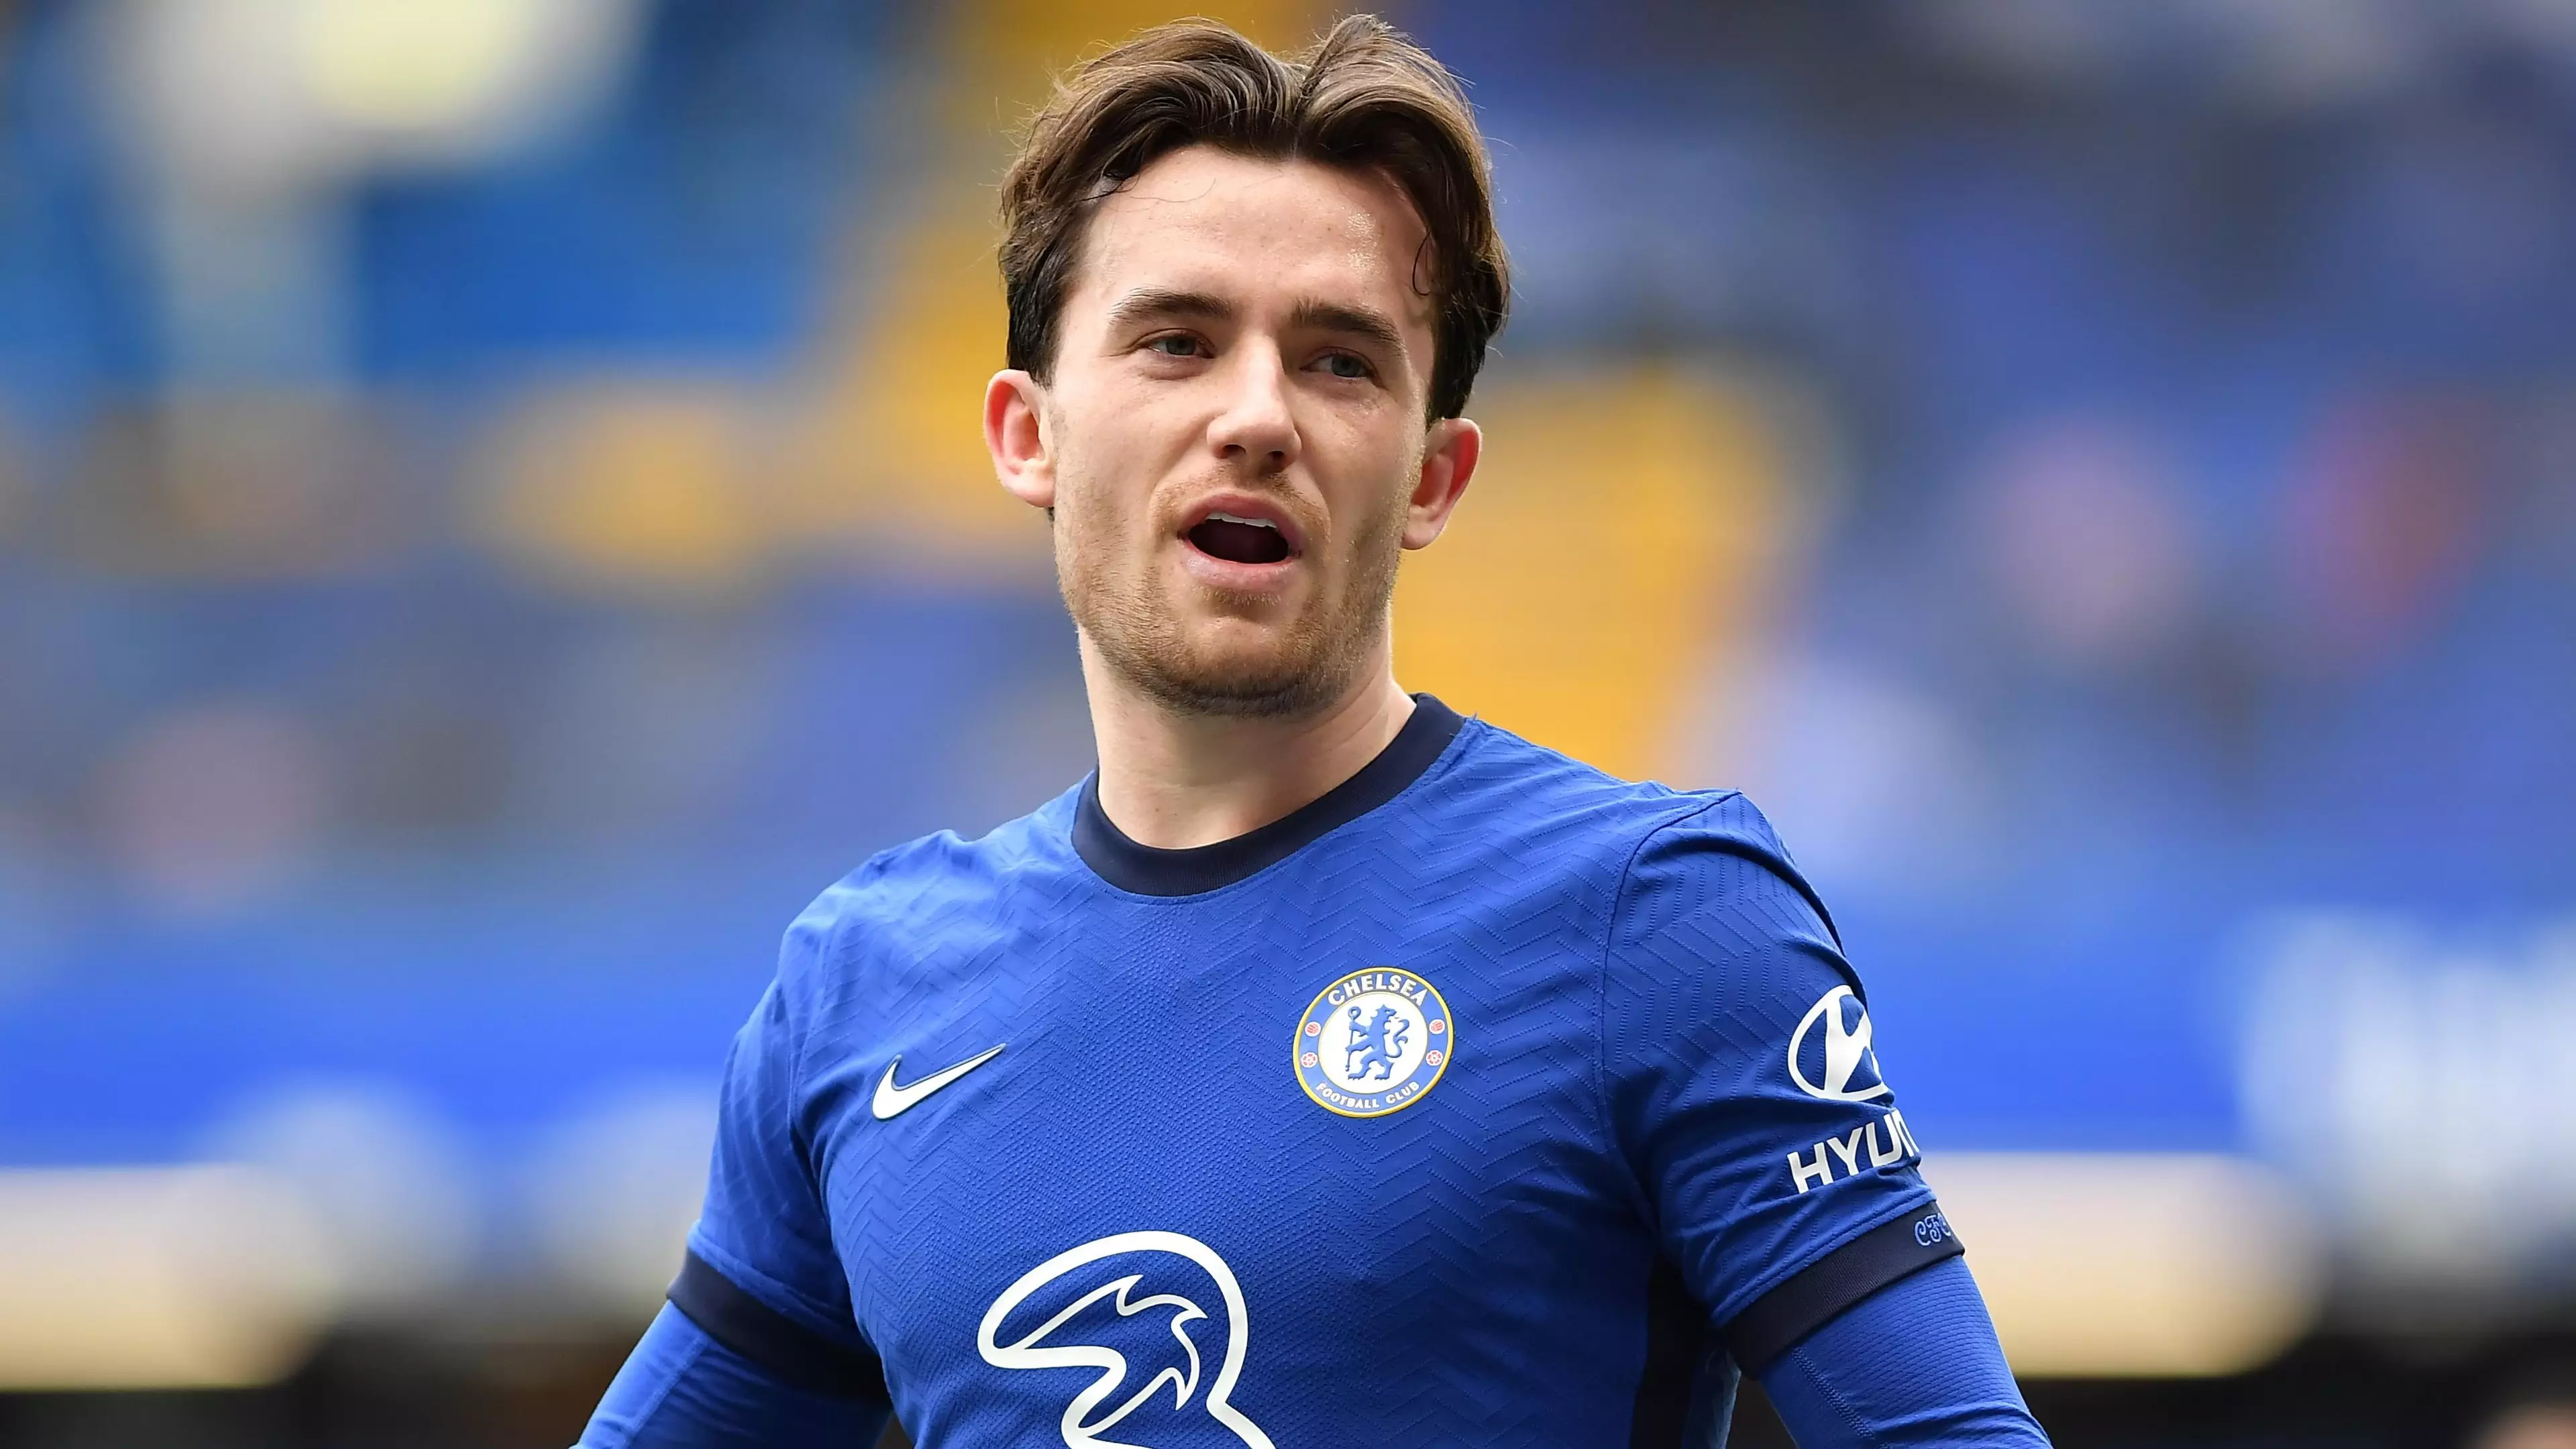 Ben Chilwell made an immediate impact after his move to Chelsea from Leicester City last summer (Image: PA)